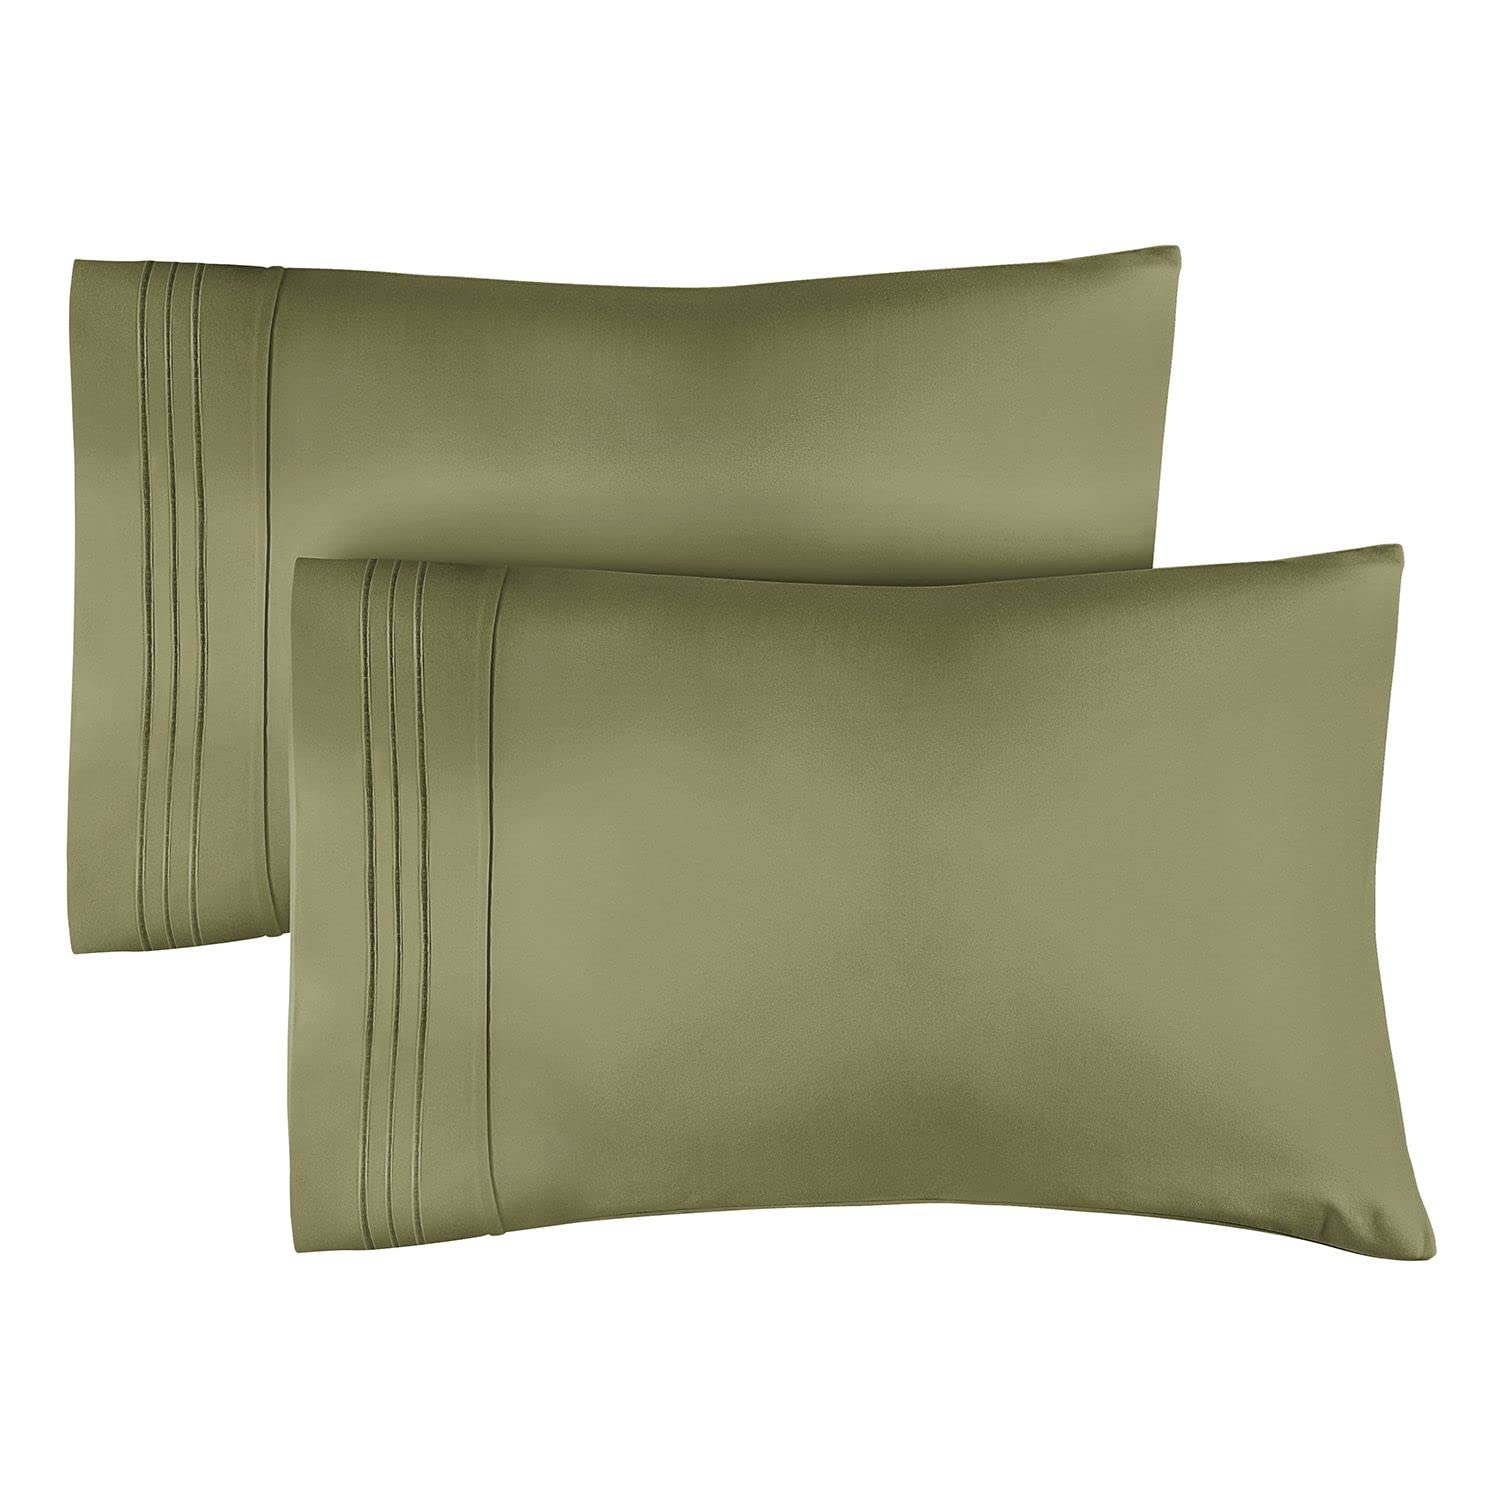 Book Cover Queen Size Pillow Cases Set of 2 – Soft, Premium Quality Pillowcase Covers – Machine Washable Protectors – 20x26 & 20x30 Pillows for Sleeping 2 Piece - Queen Size Pillow Case Set Queen 13 - Sage Green